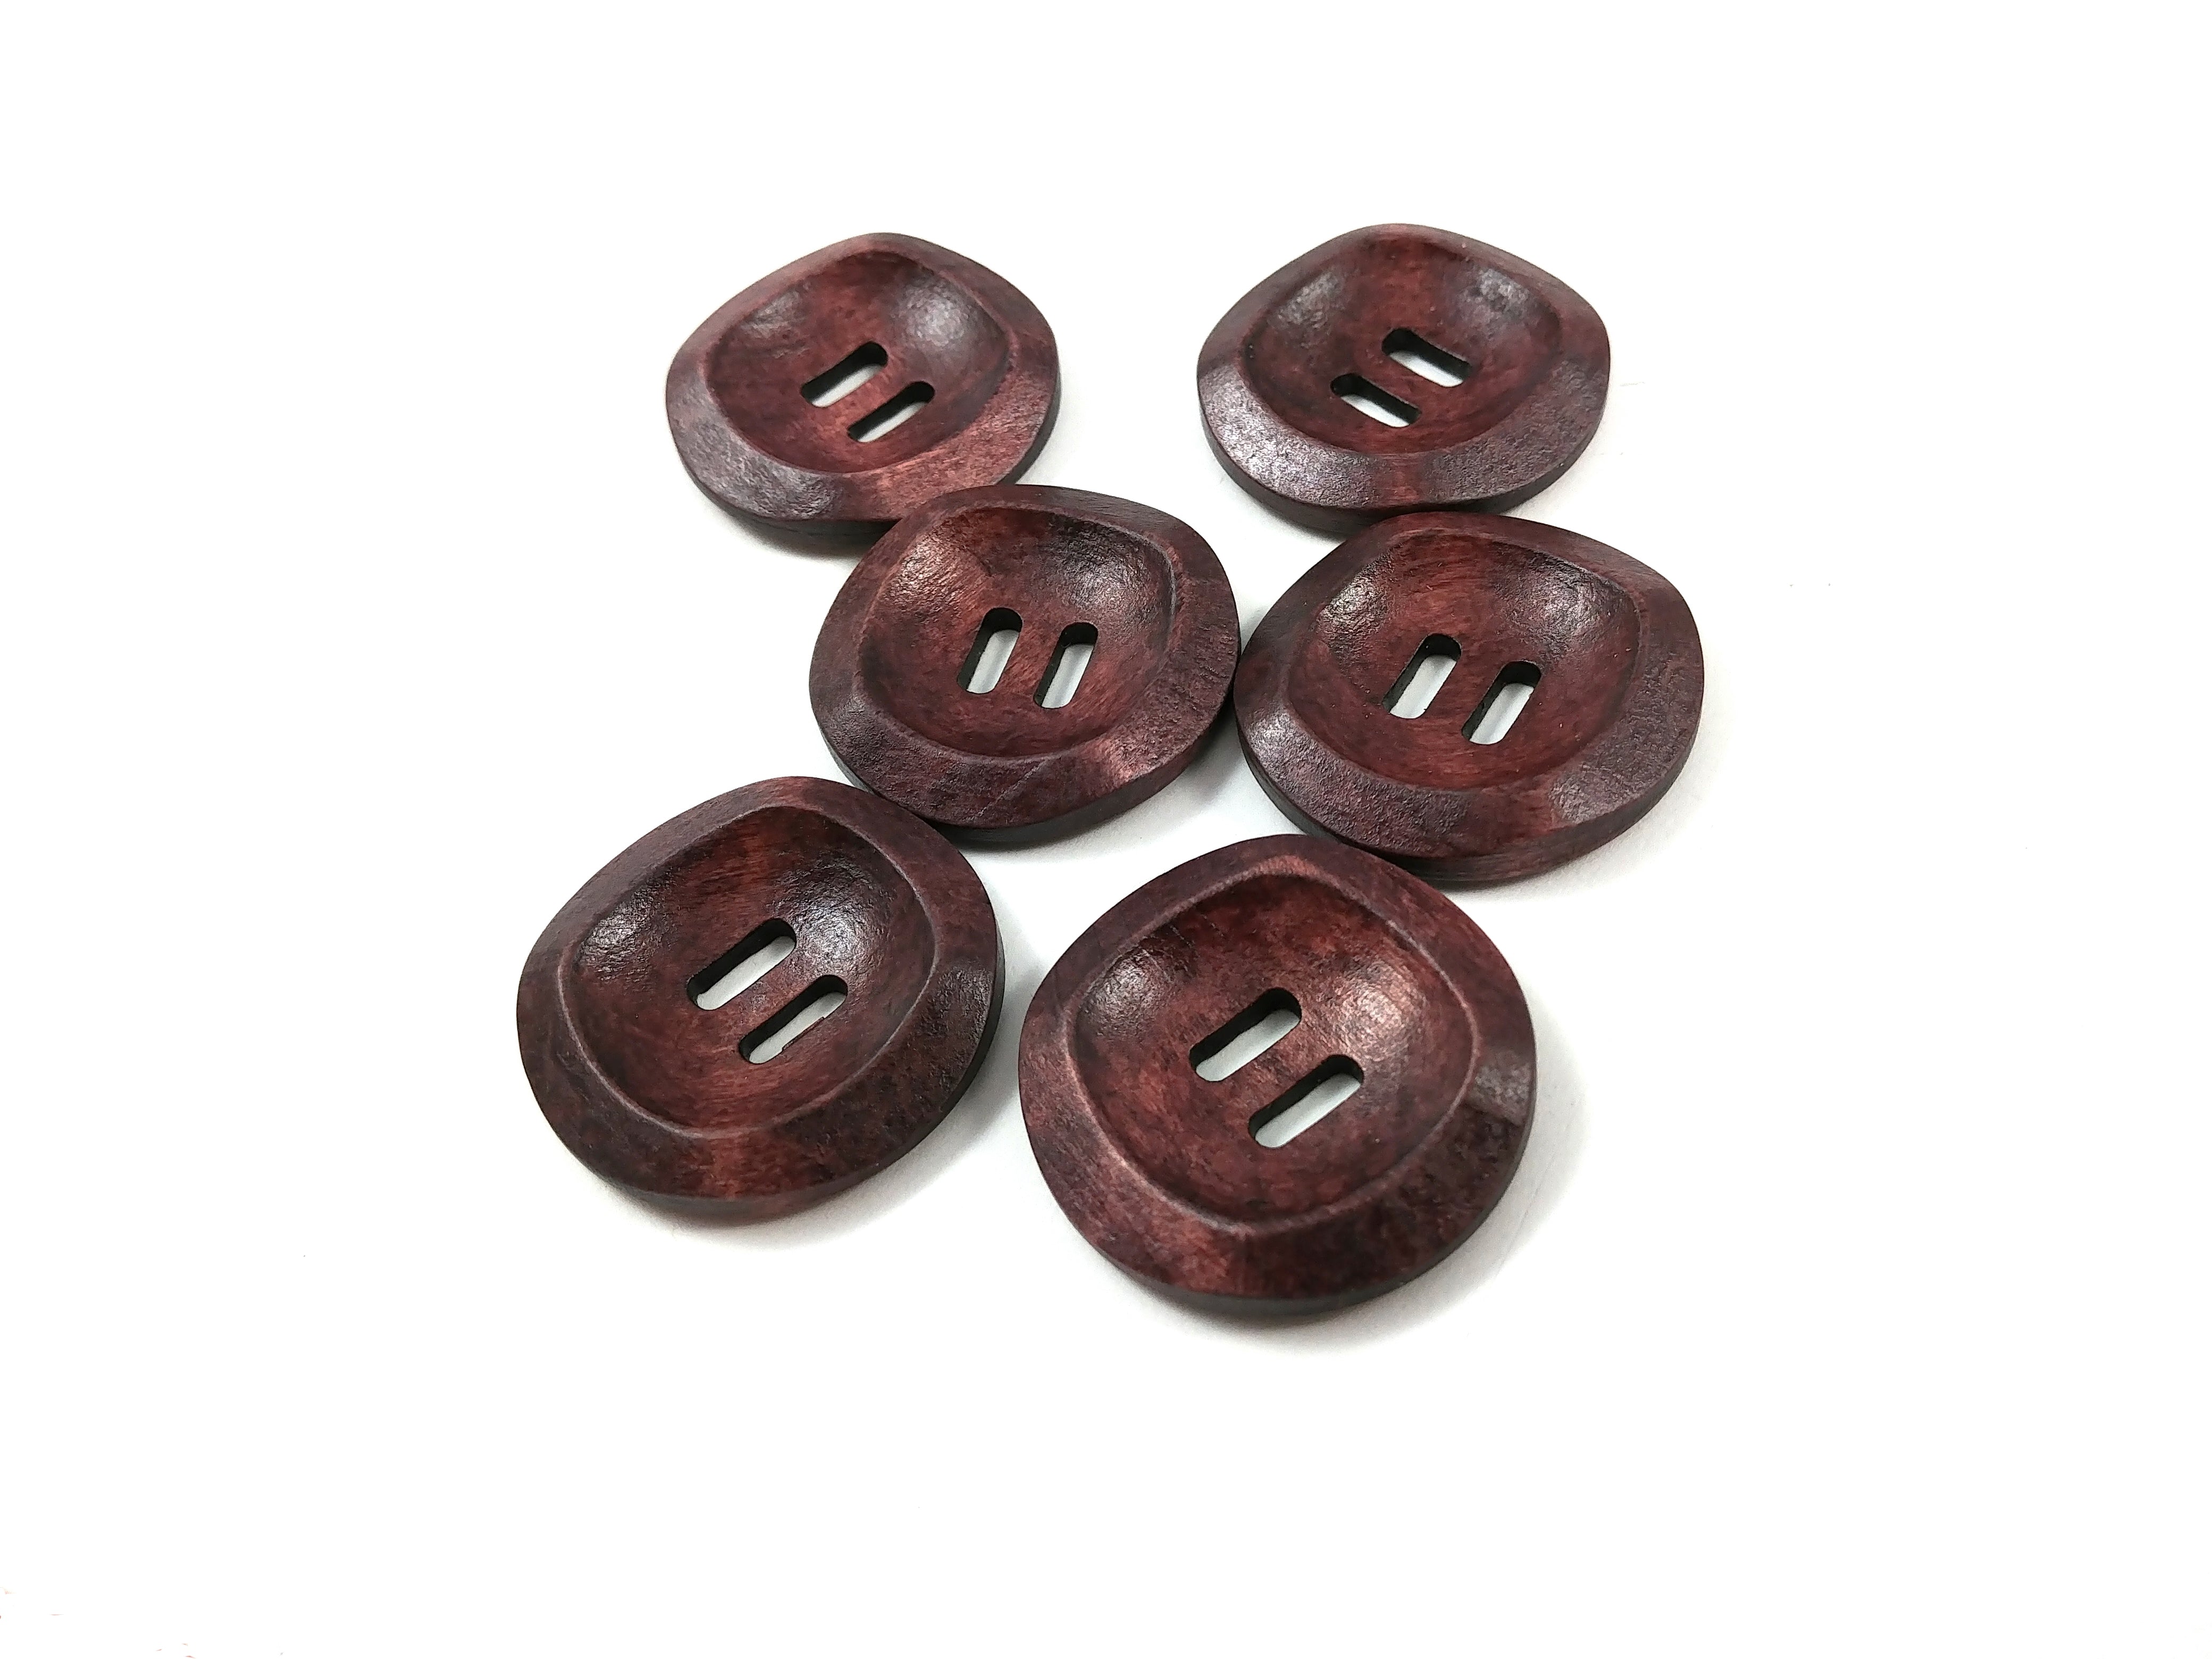 Dark Brown Wooden Sewing Buttons 30mm - set of 6 natural wood button